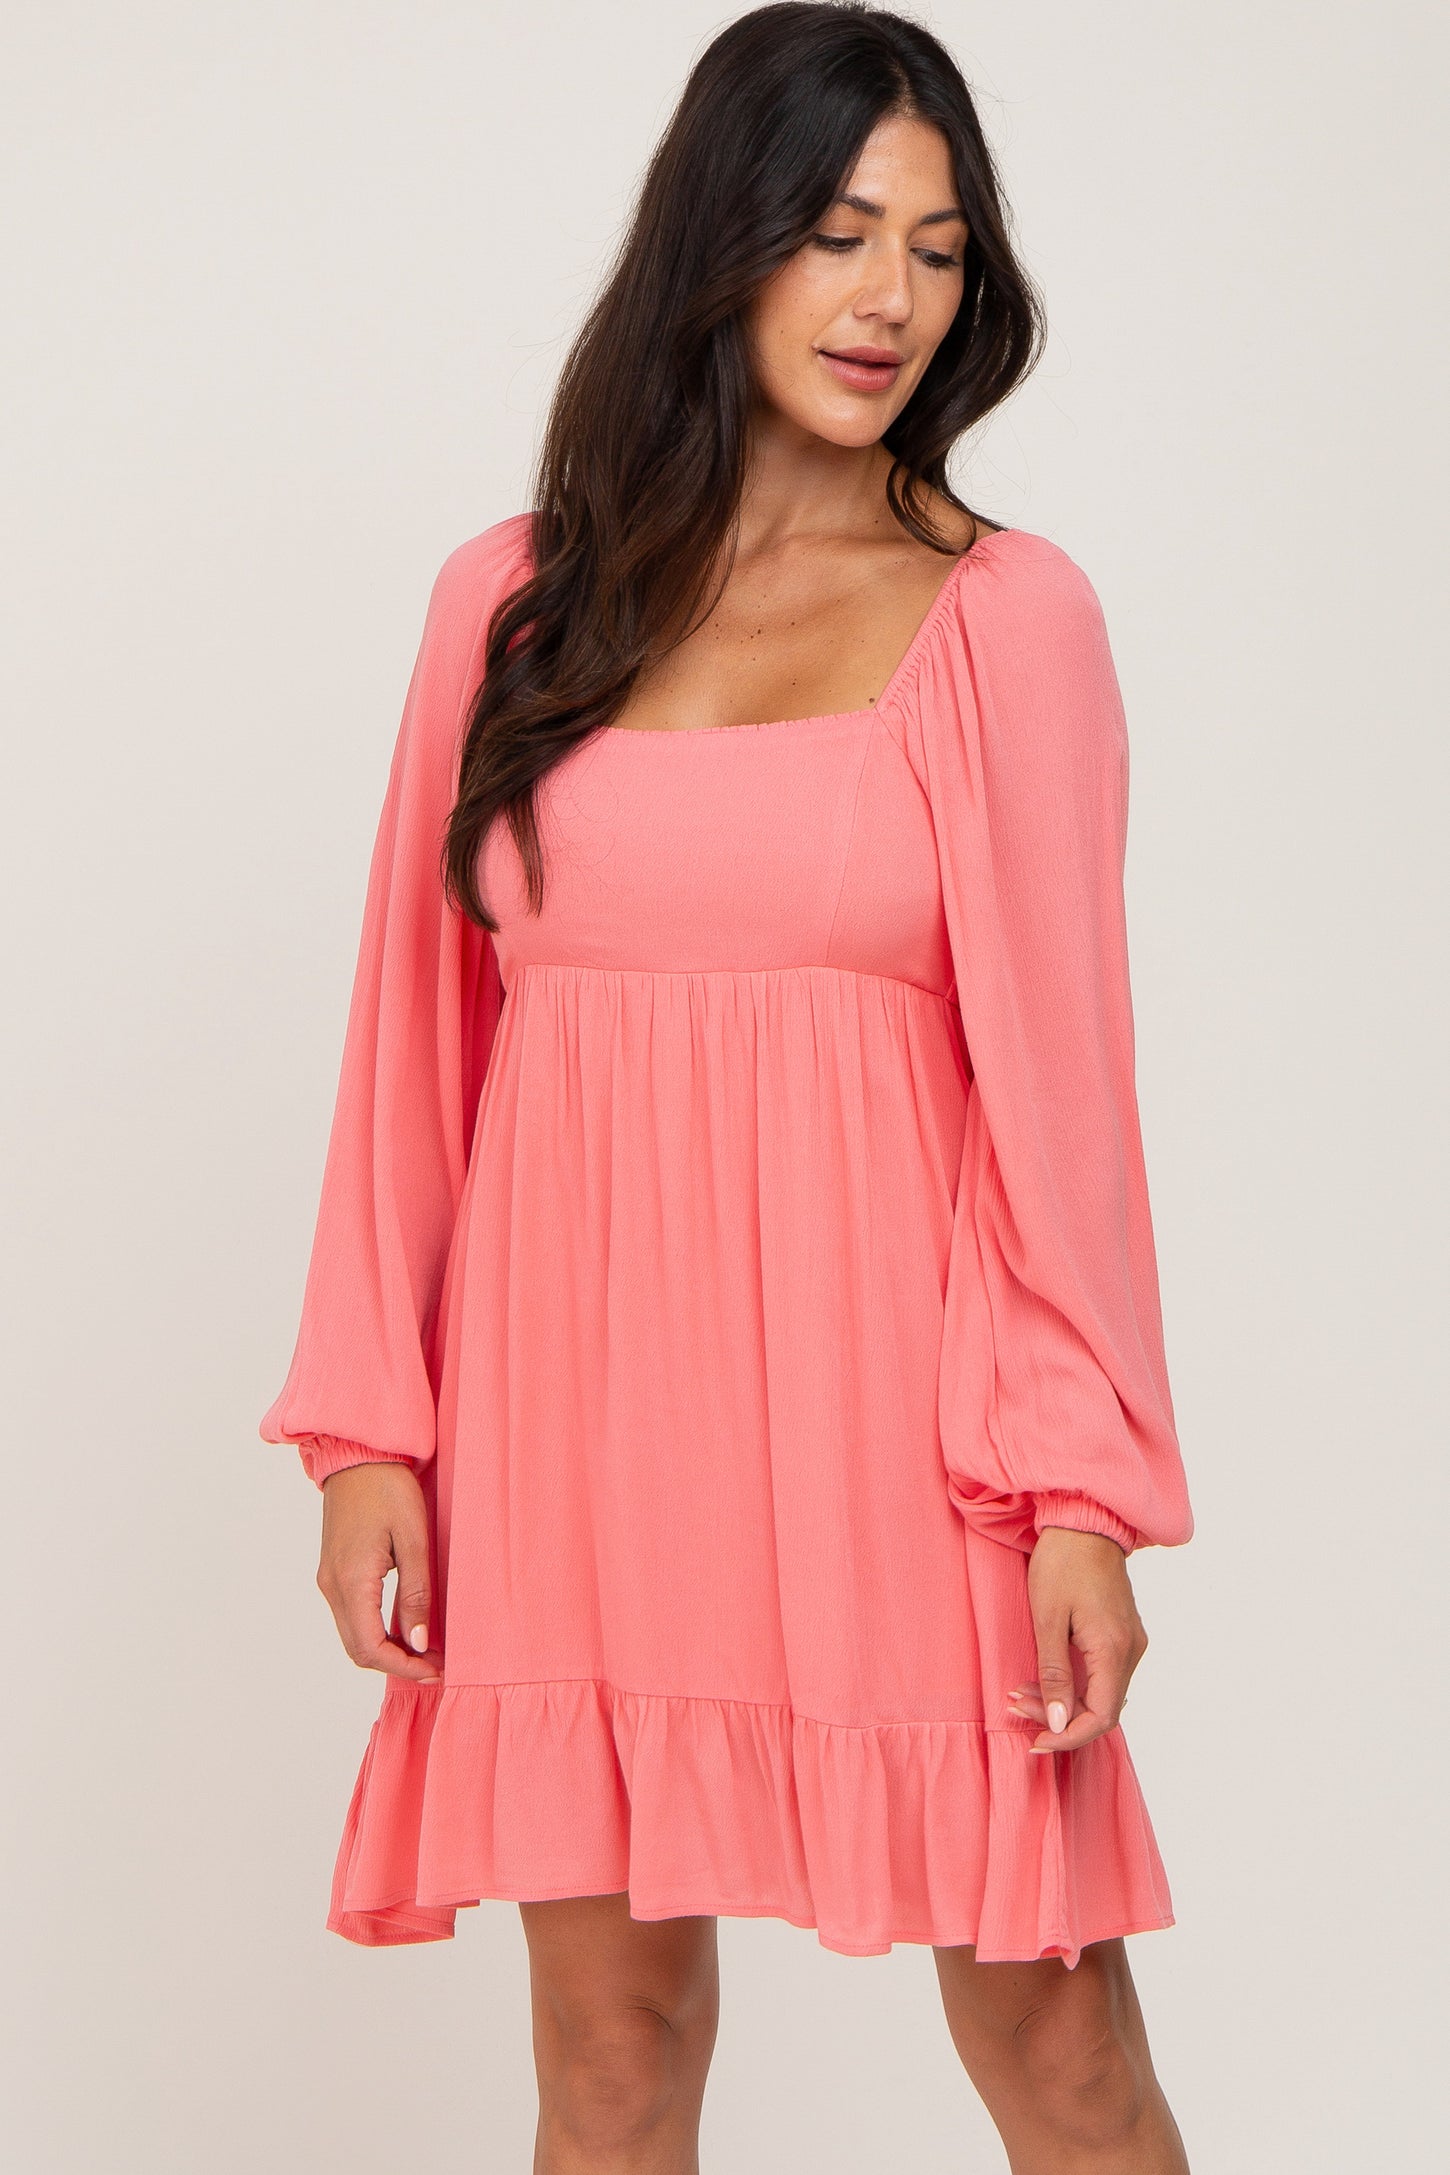 Coral Square Neck Puff Long Sleeve Dress